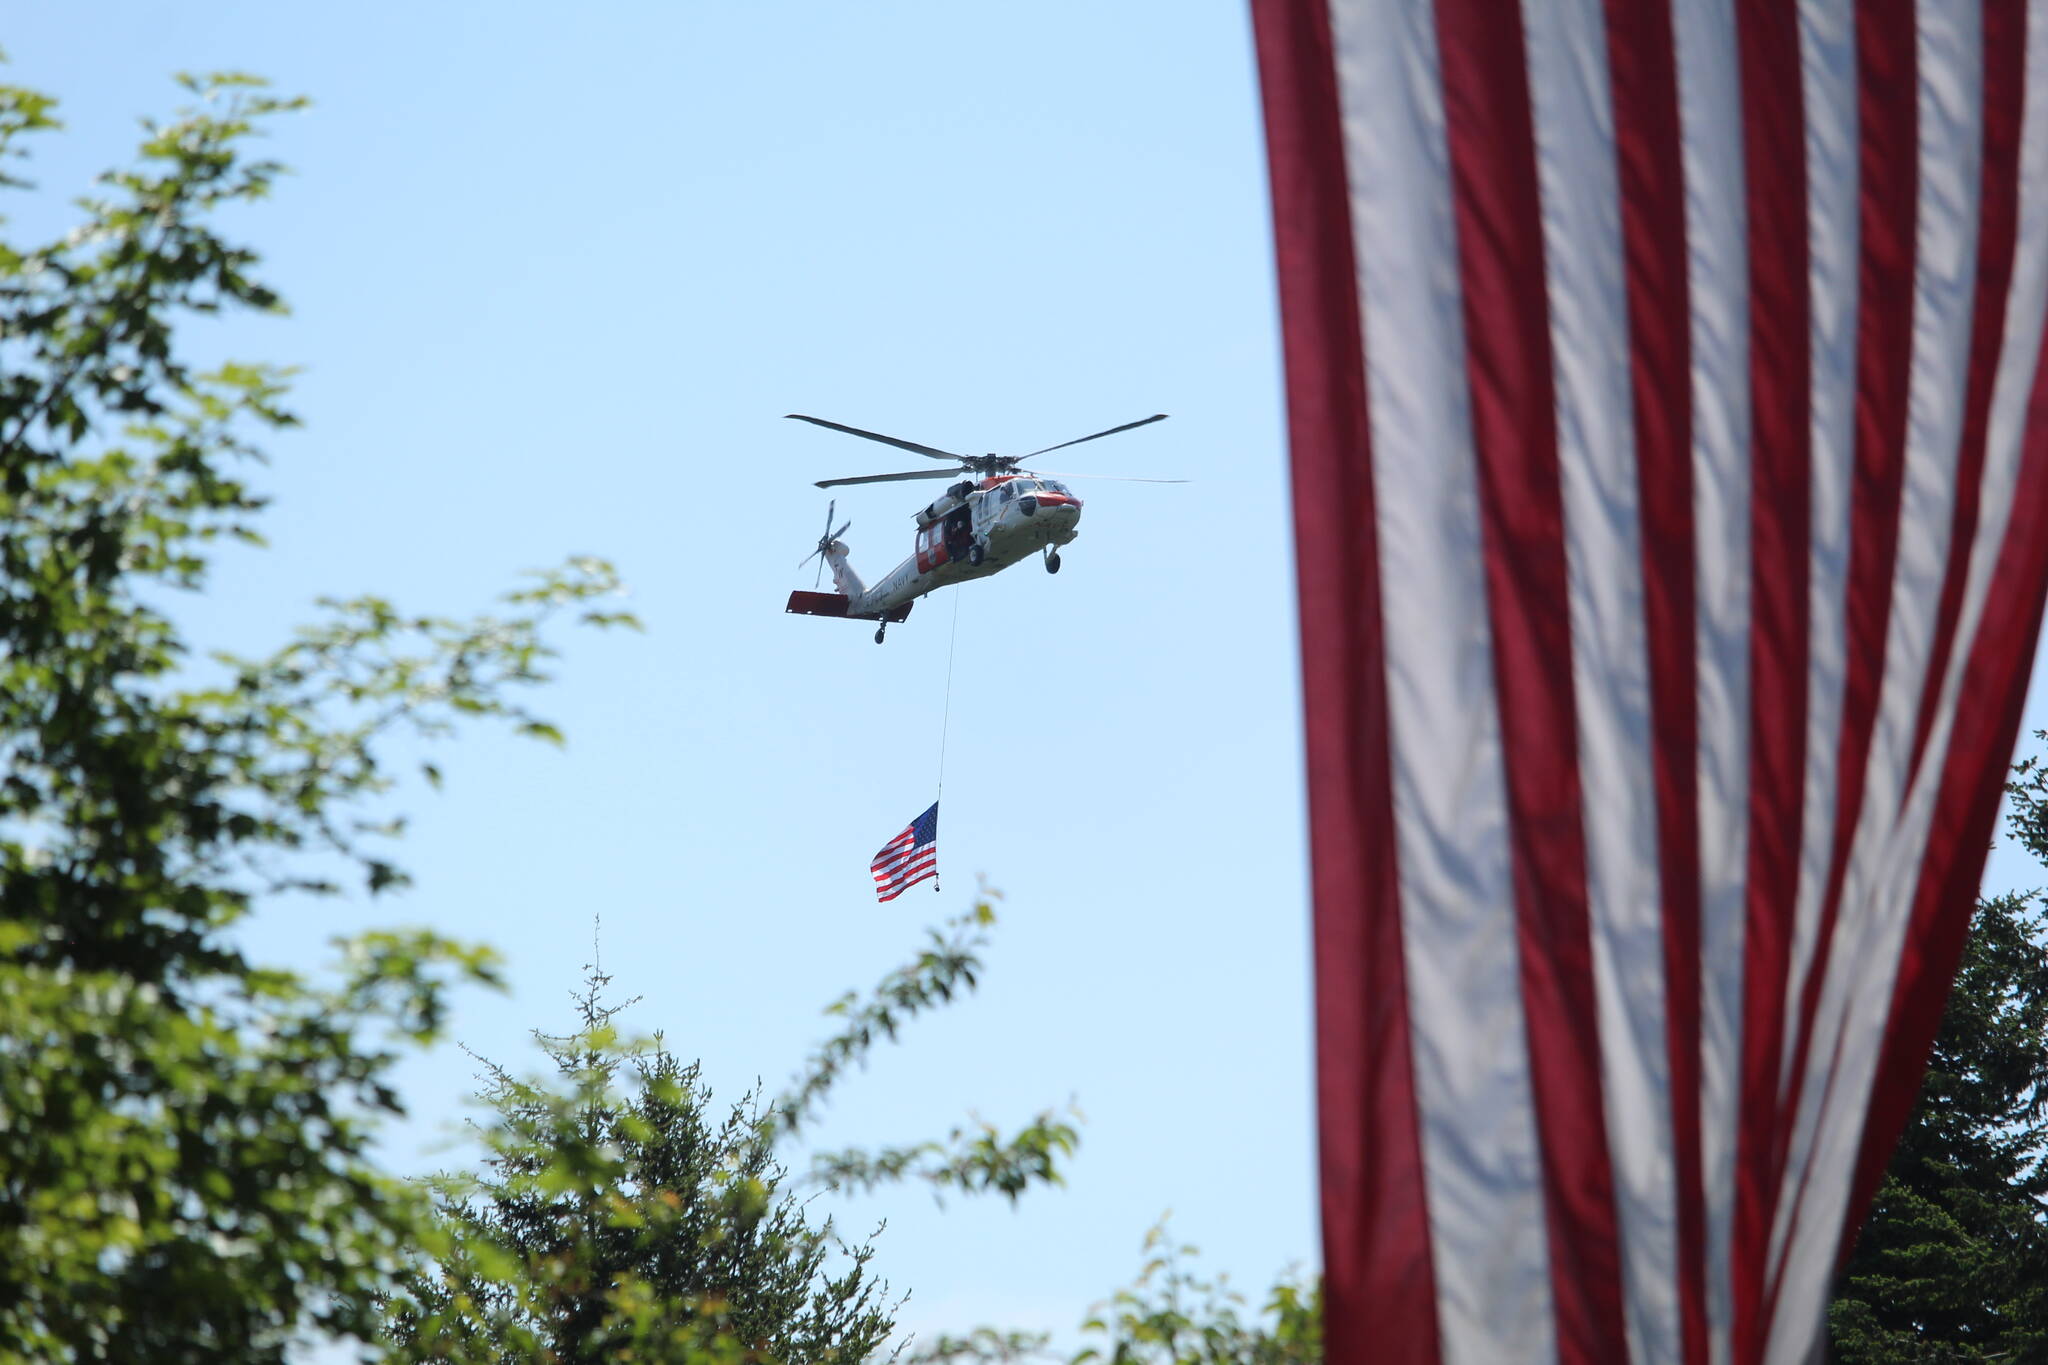 Photo by Karina Andrew/Whidbey News-Times
An NAS Whidbey Island Search and Rescue helicopter executes a flyover at the conclusion of the Service of Remembrance on Memorial Day.